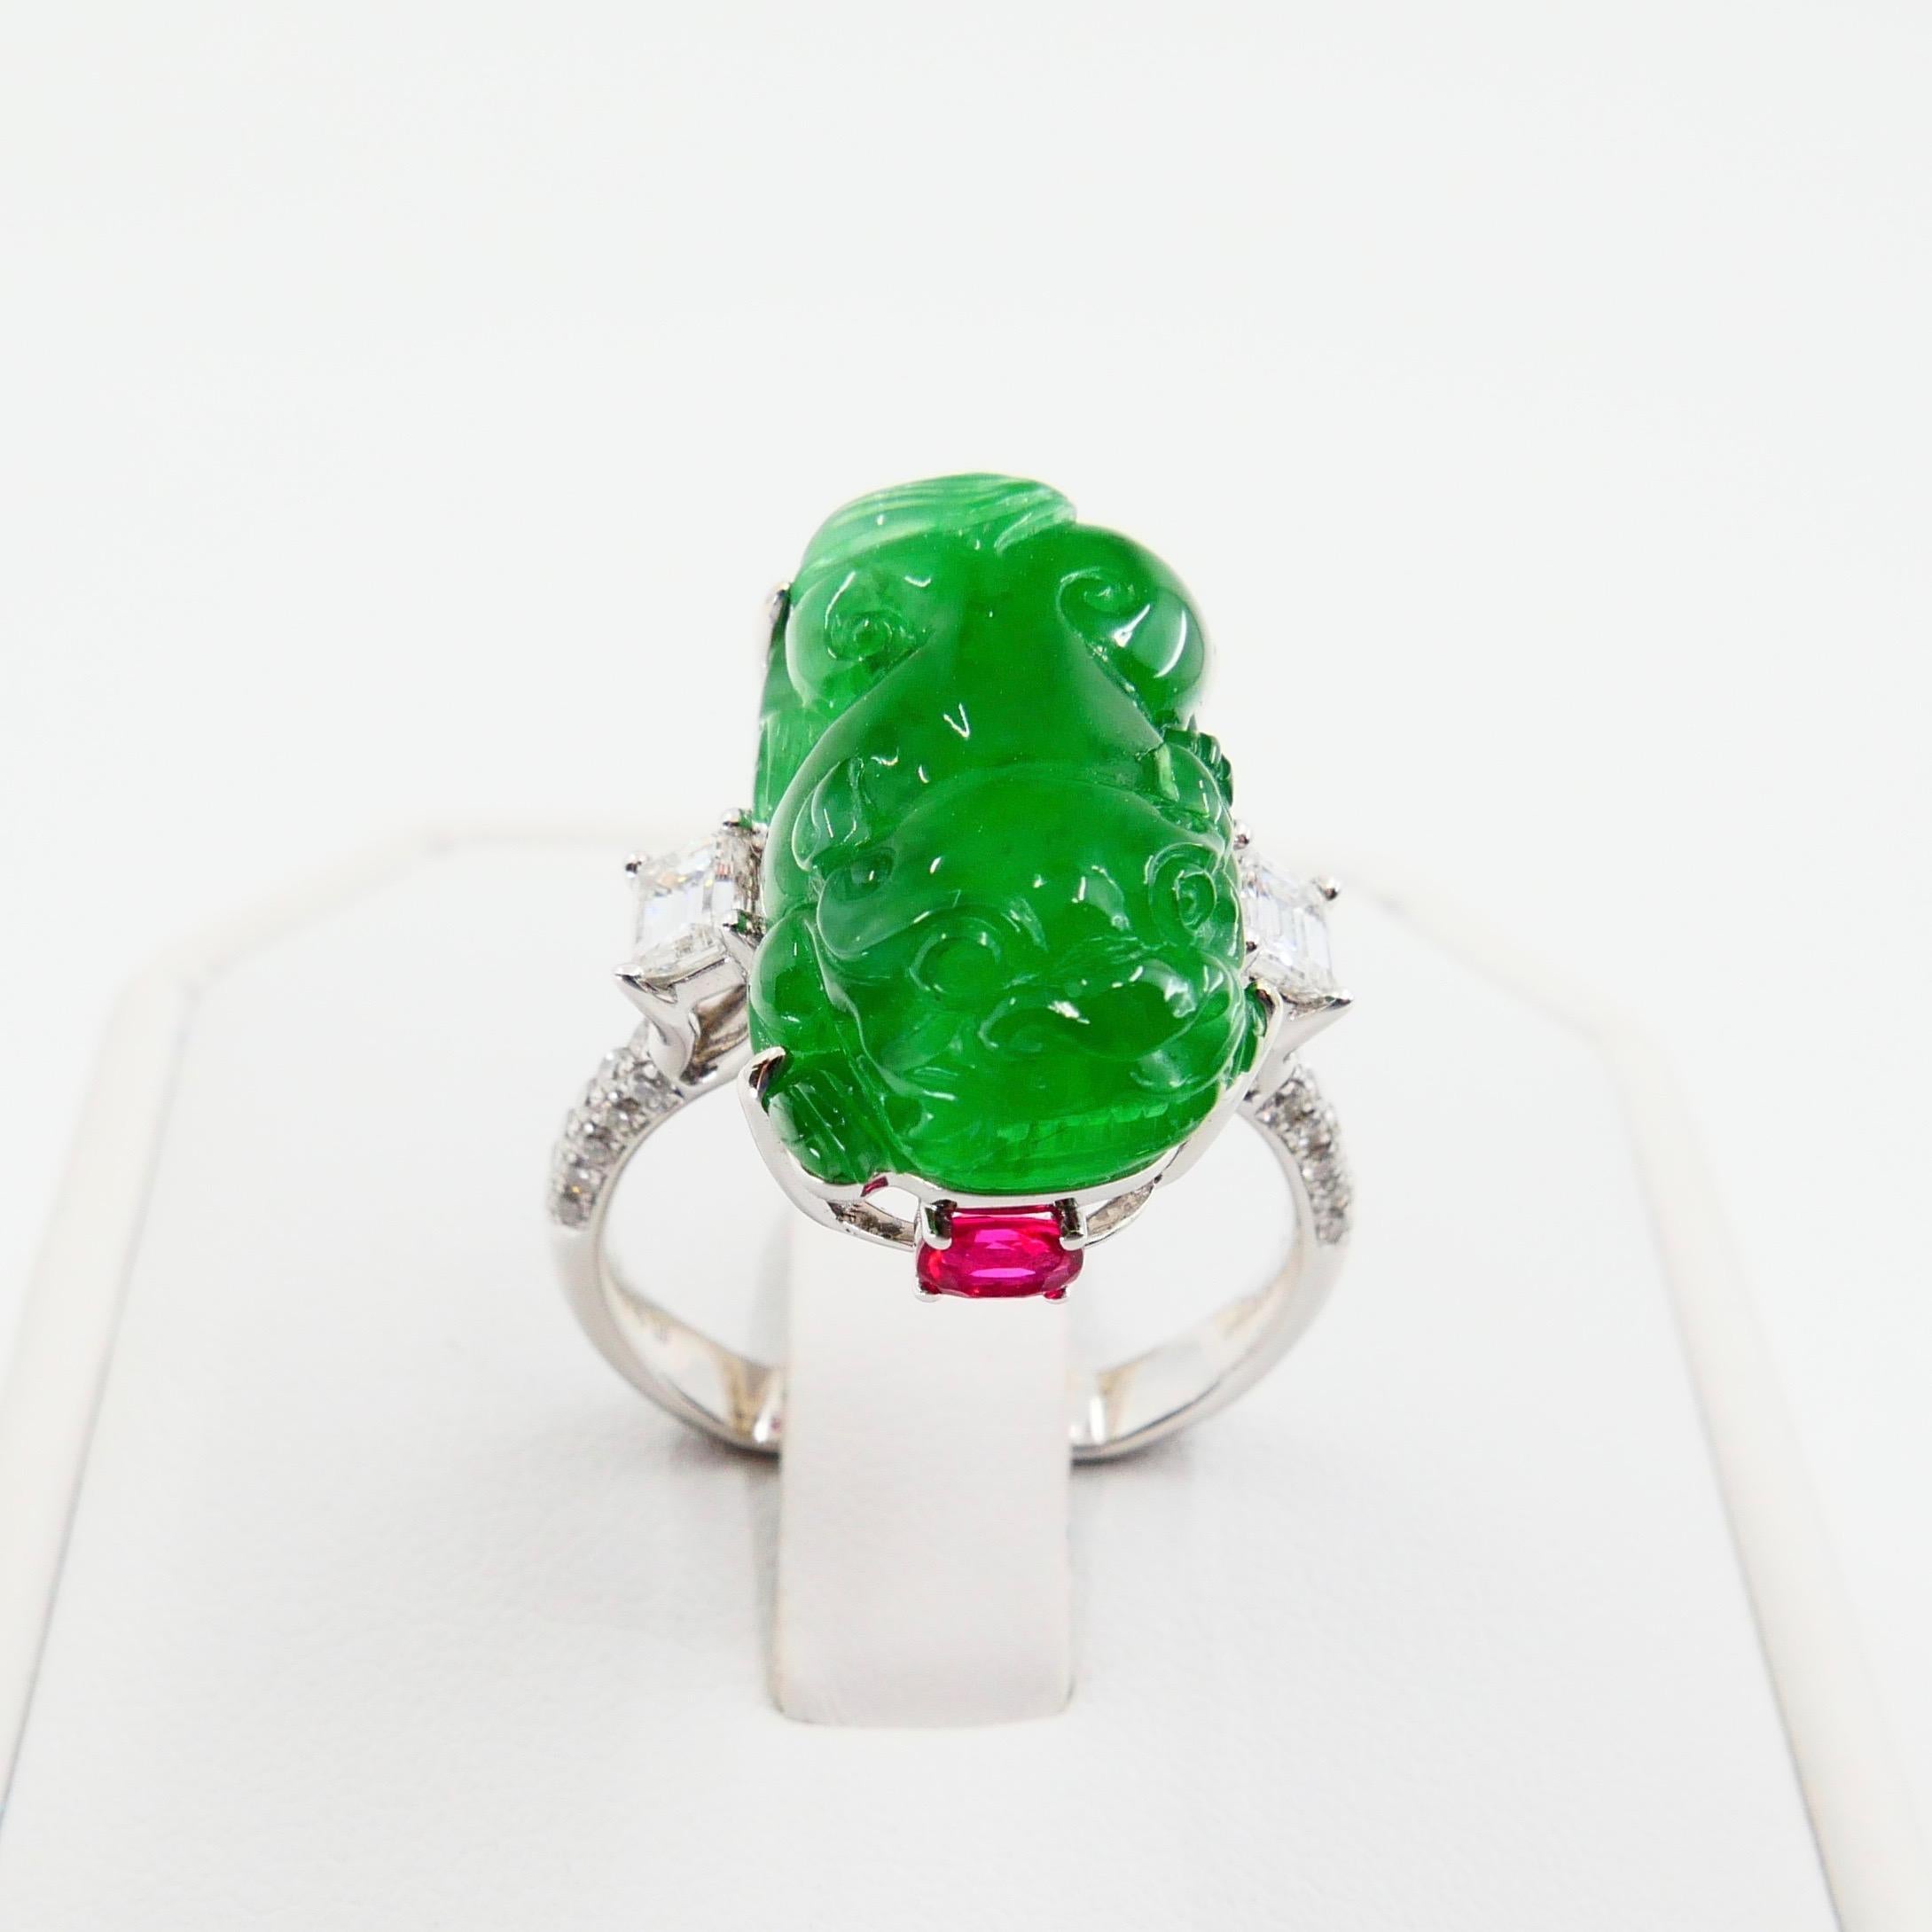 Emerald Cut Certified Type A Jadeite Jade Spinel and Diamond Ring, Super Vivid Green Color